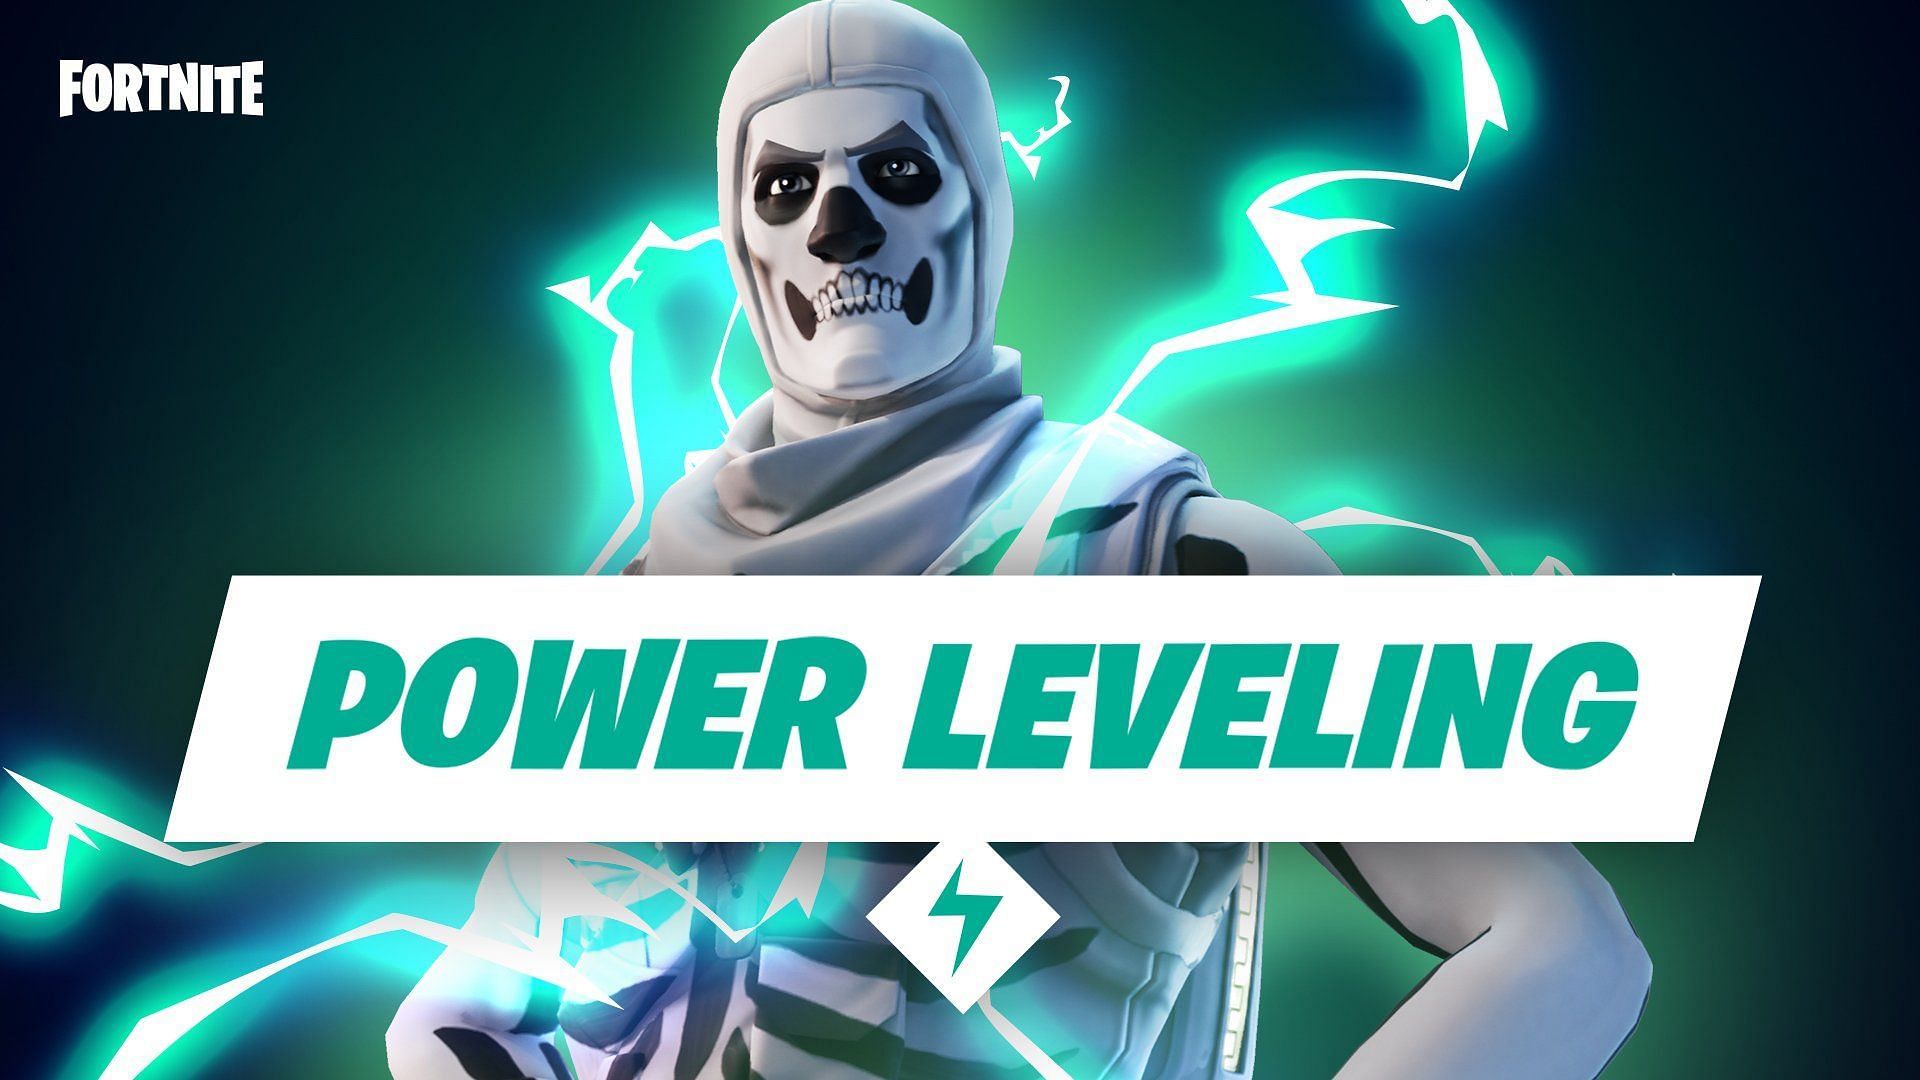 Fortnite players can pile up thousands of supercharged XP in Chapter 3 (Image via Twitter)